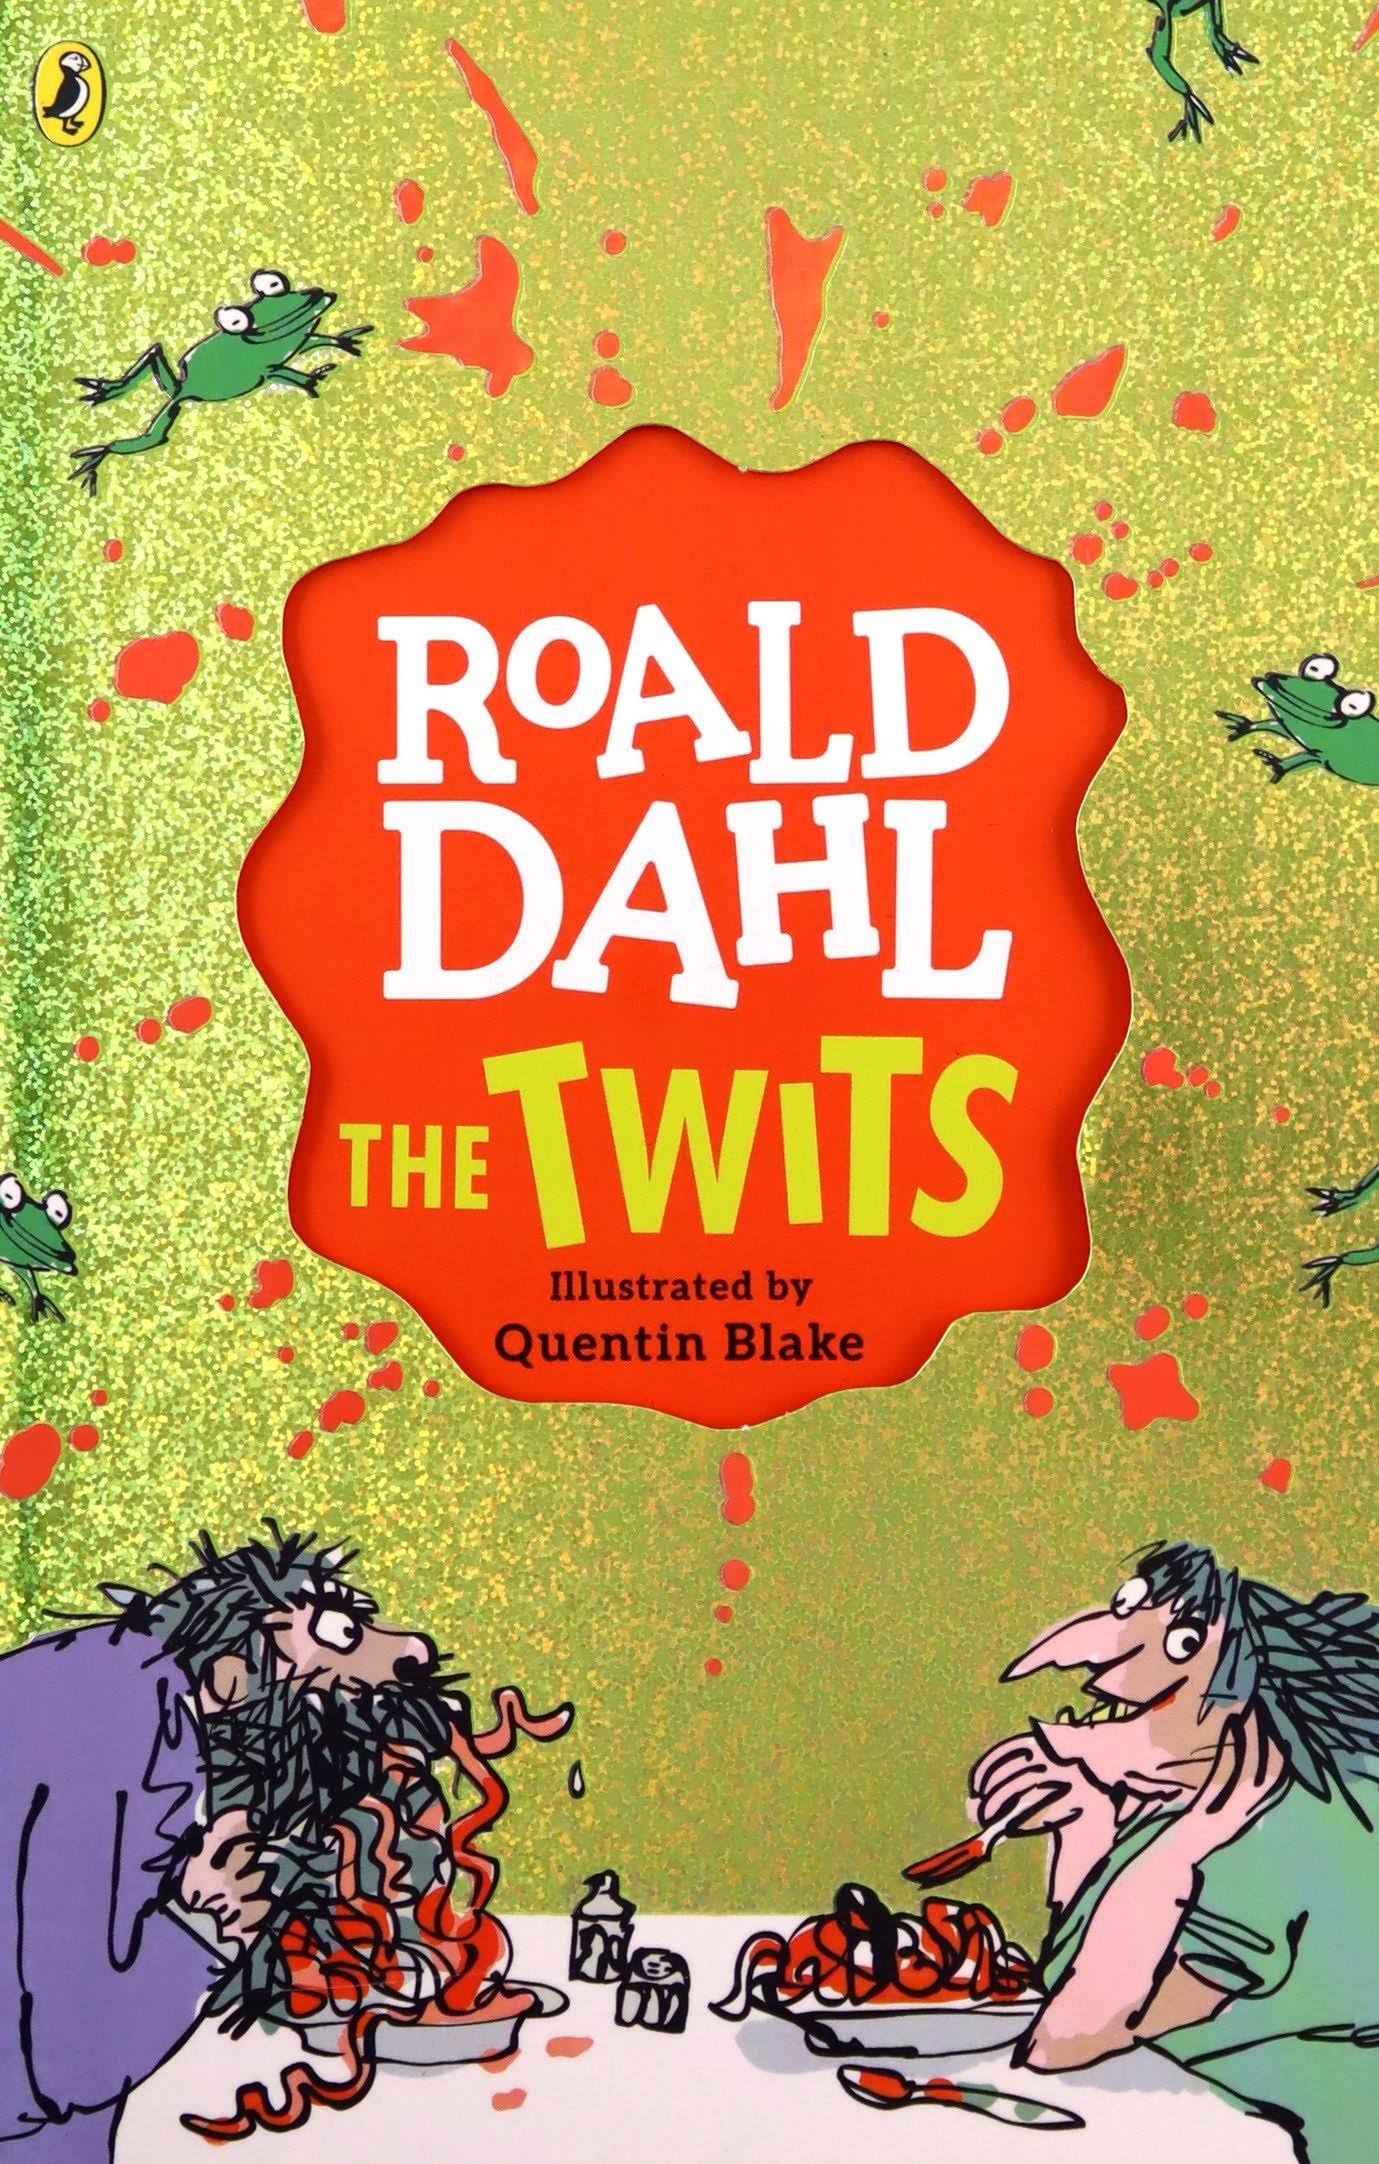 The Twits [Book]